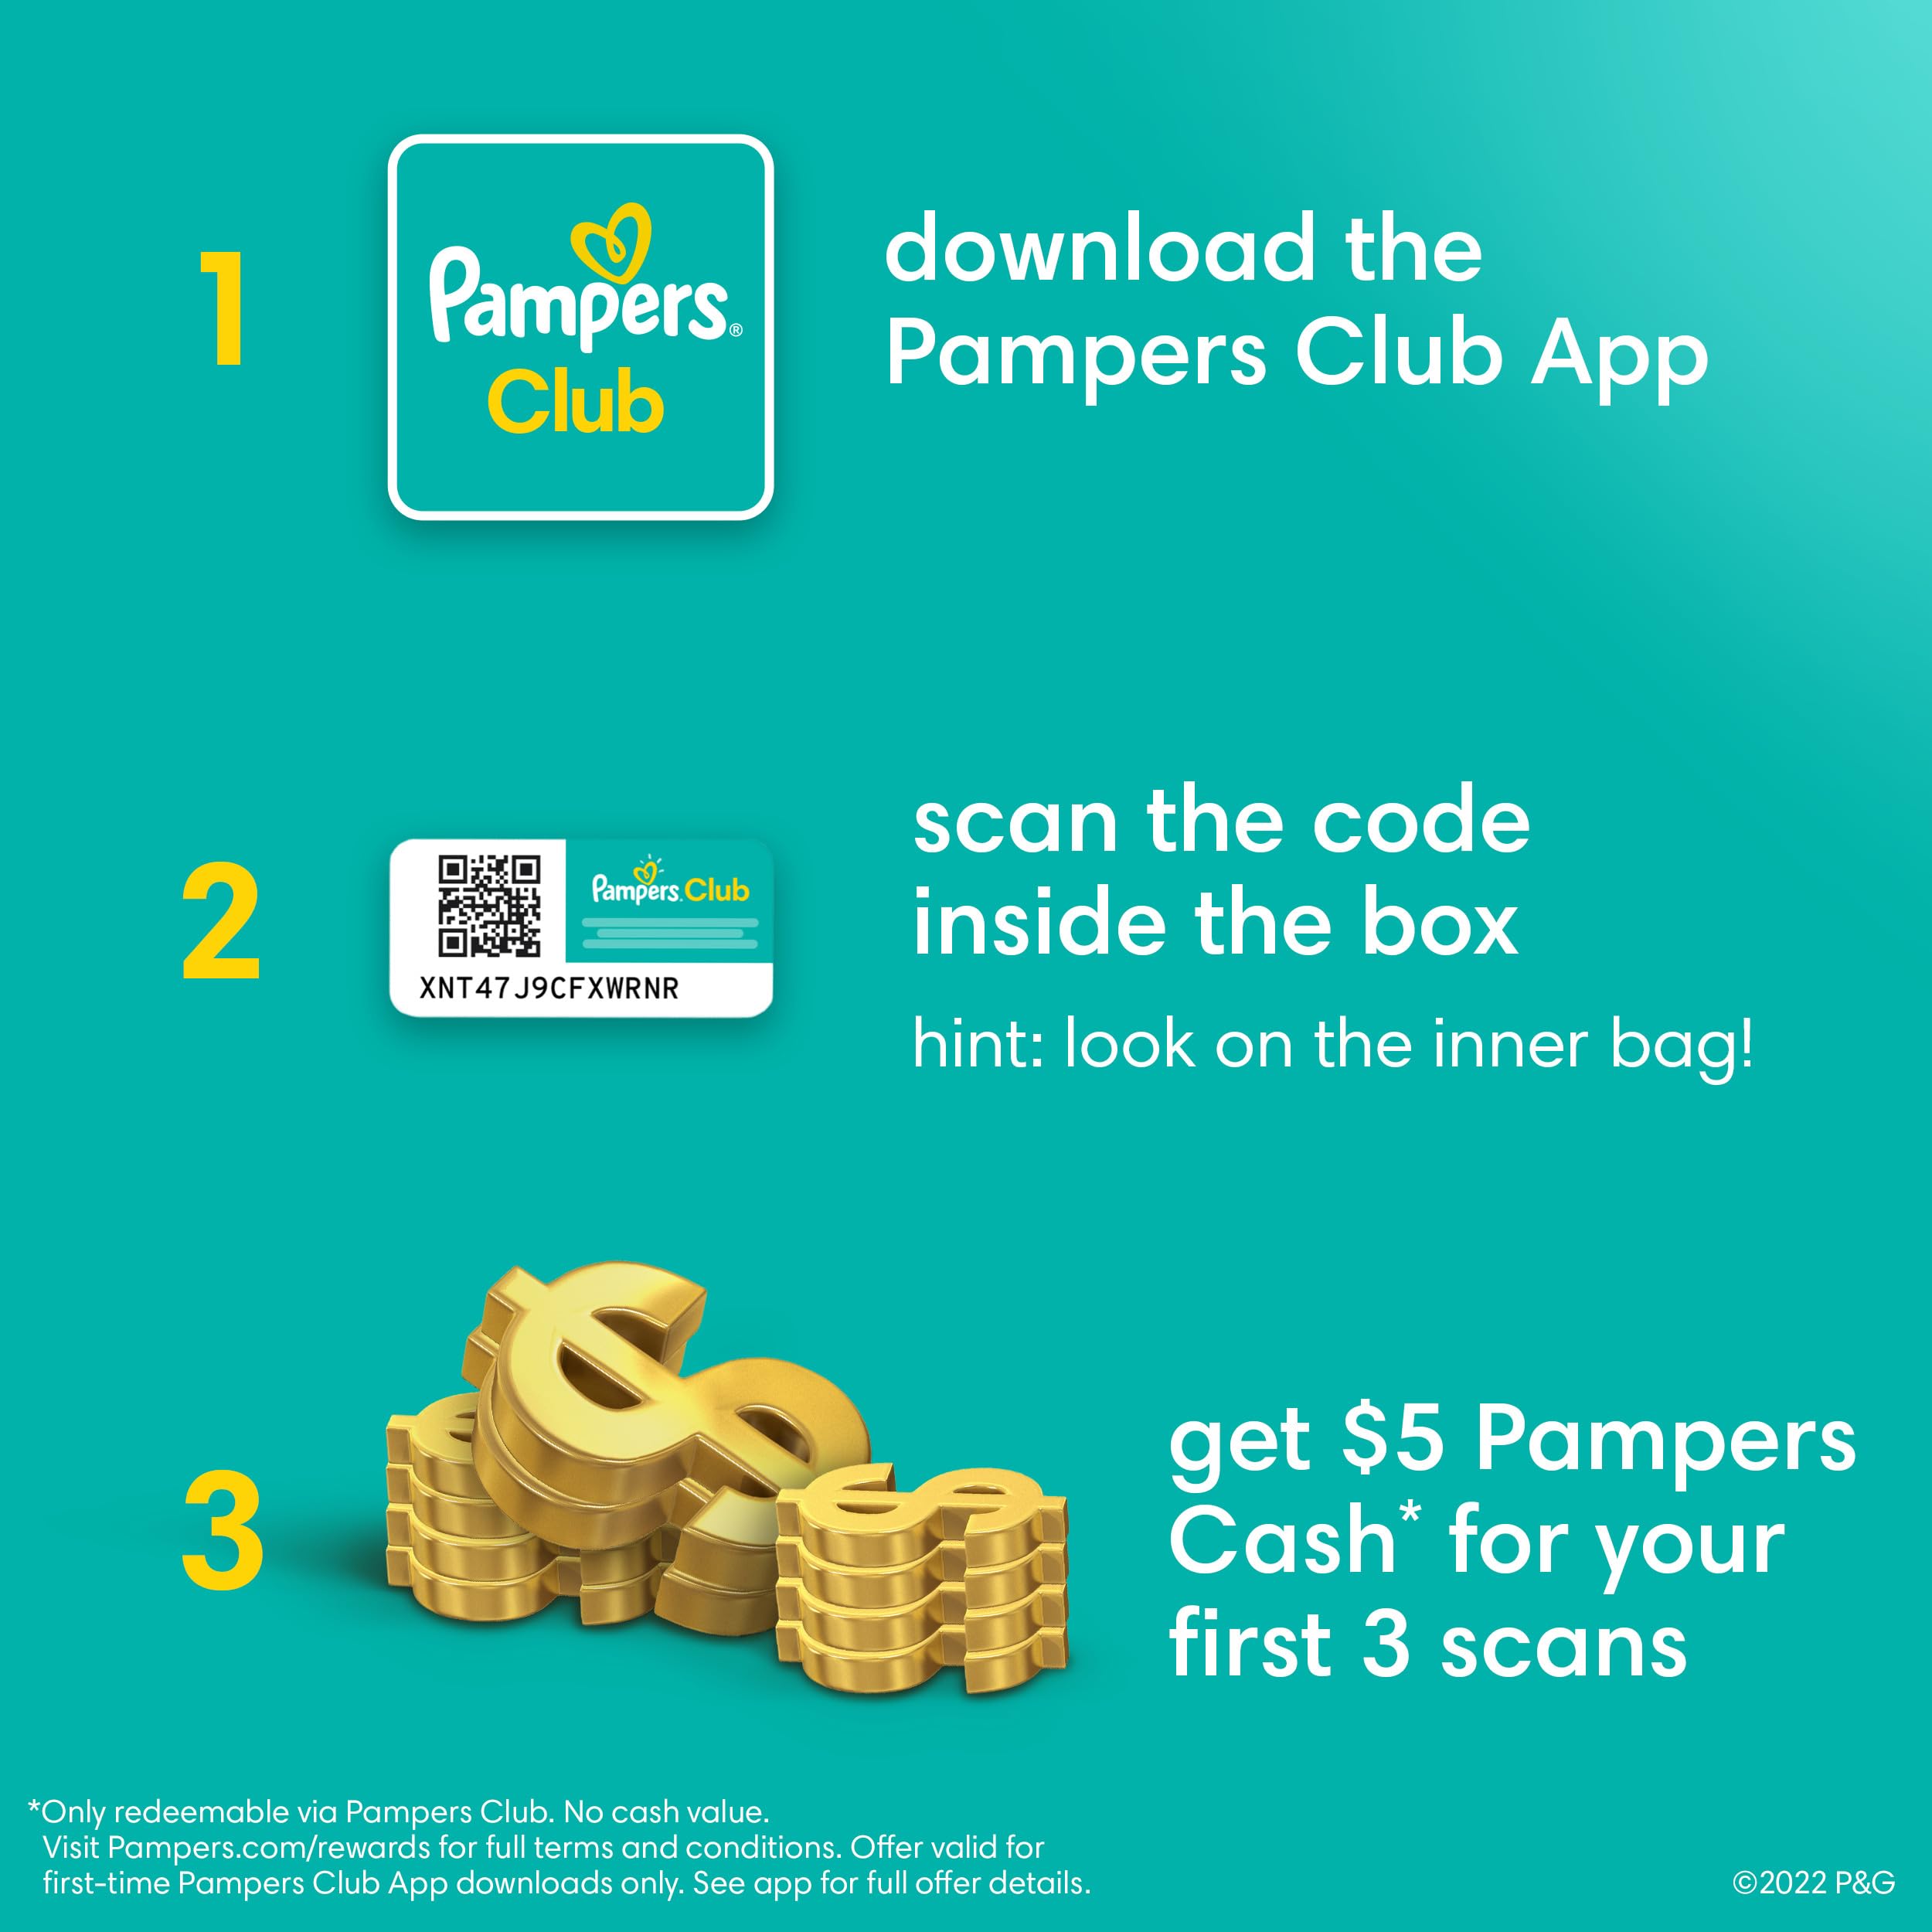 Pampers Baby Dry Diapers Size 7, 54 count - Disposable Diapers